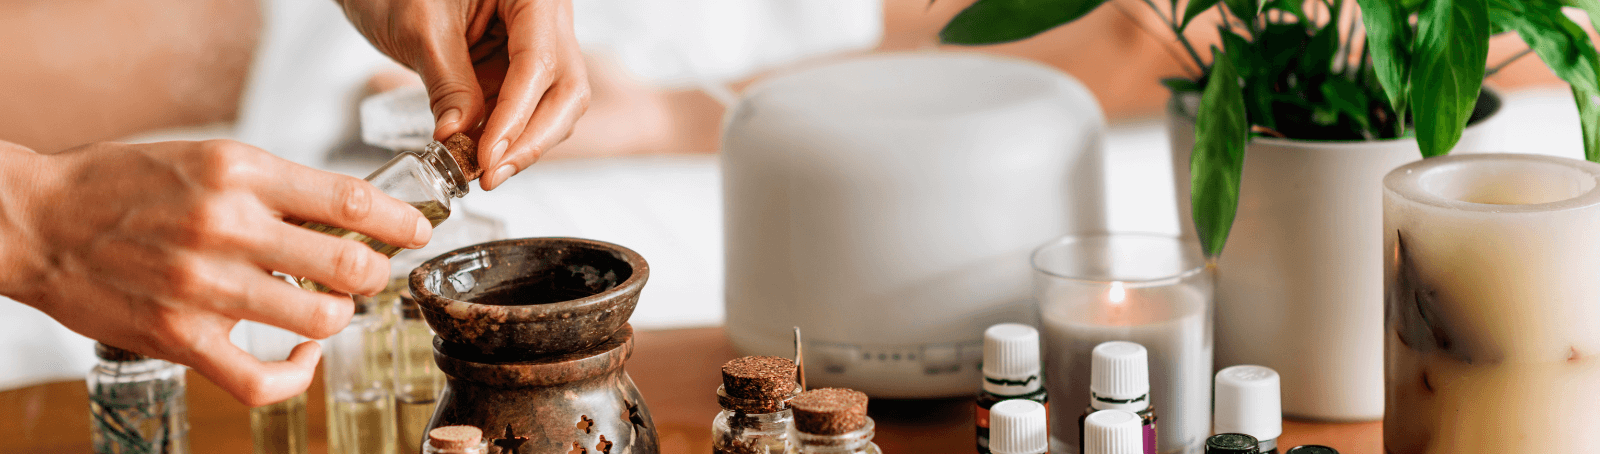 Understanding the Science Behind Aromatherapy and Essential Oils in Bangkok